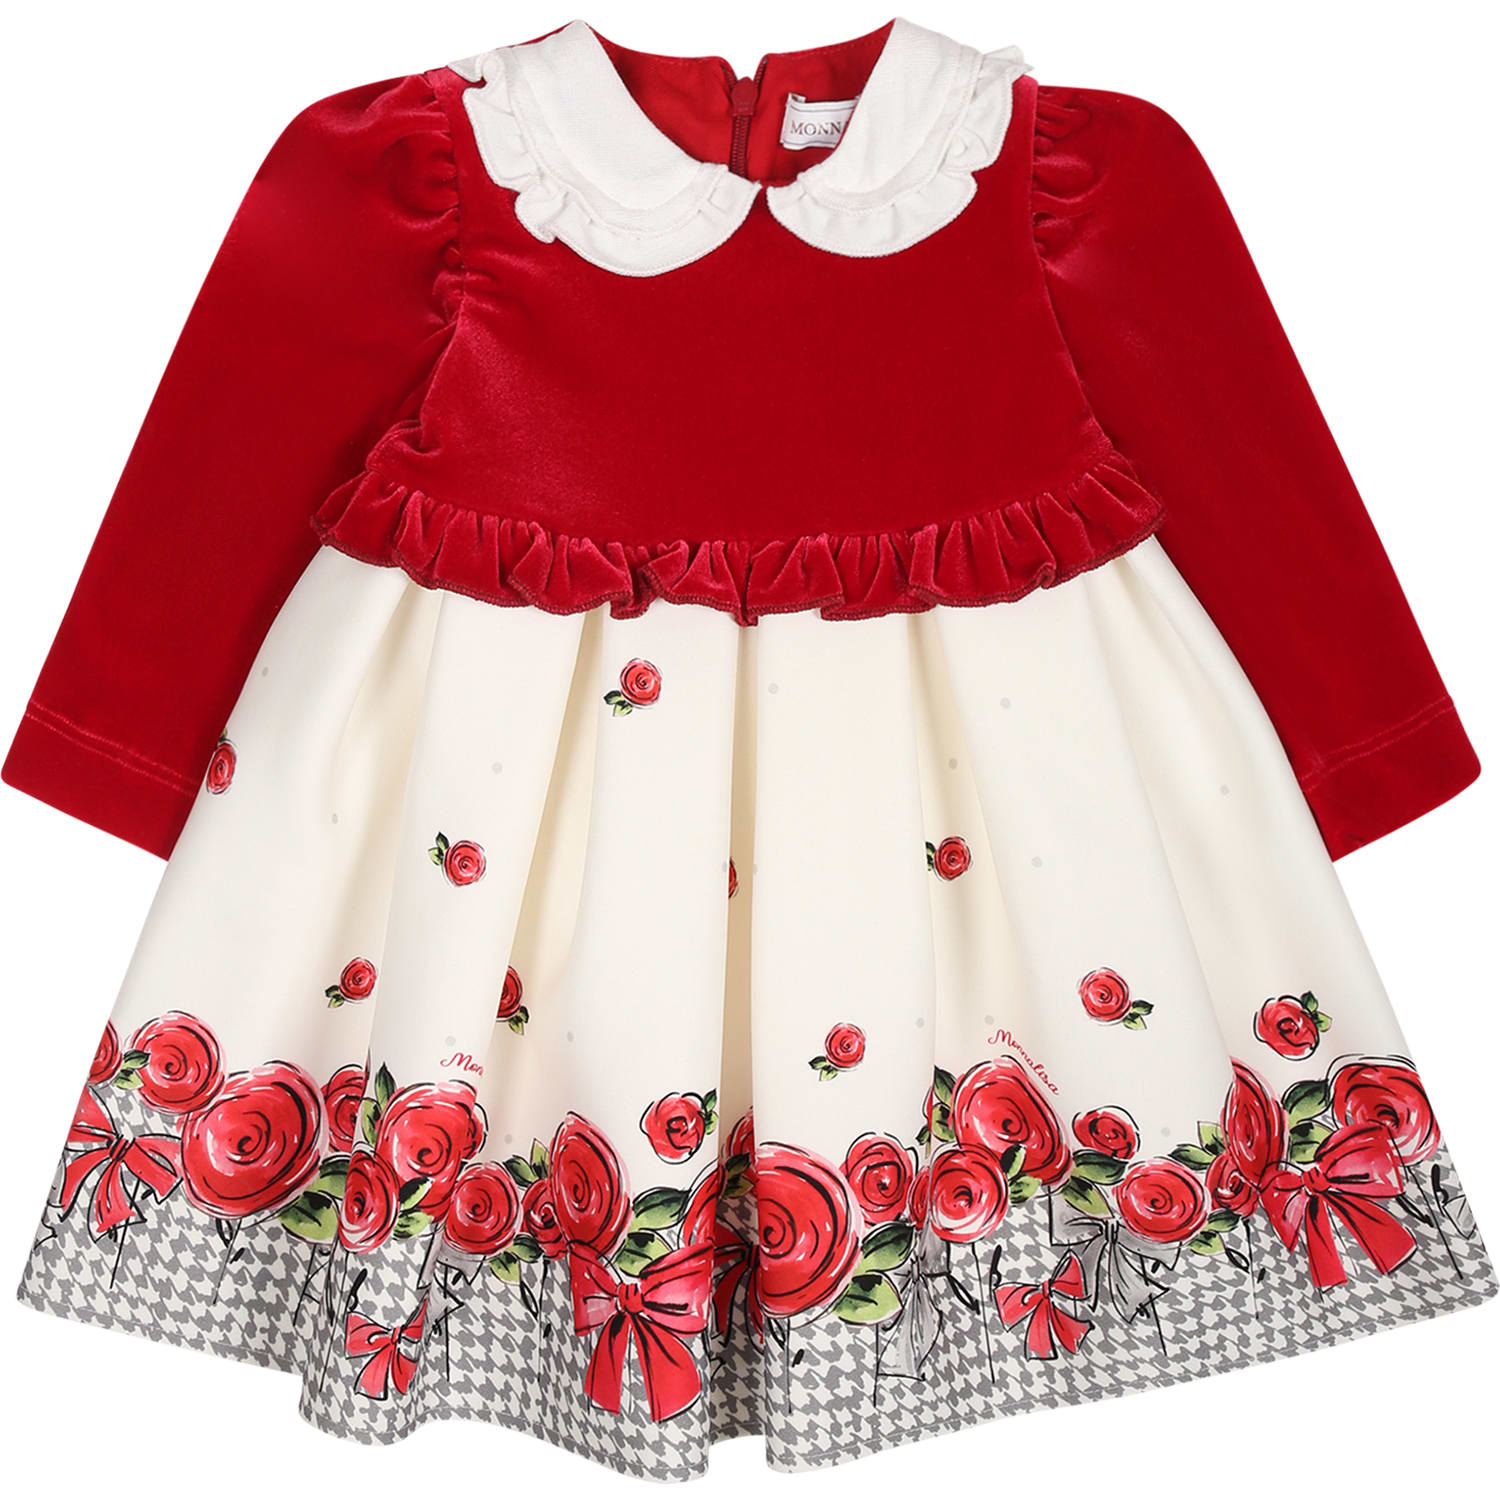 MONNALISA IVORY DRESS FOR BABY GIRL WITH ROSES